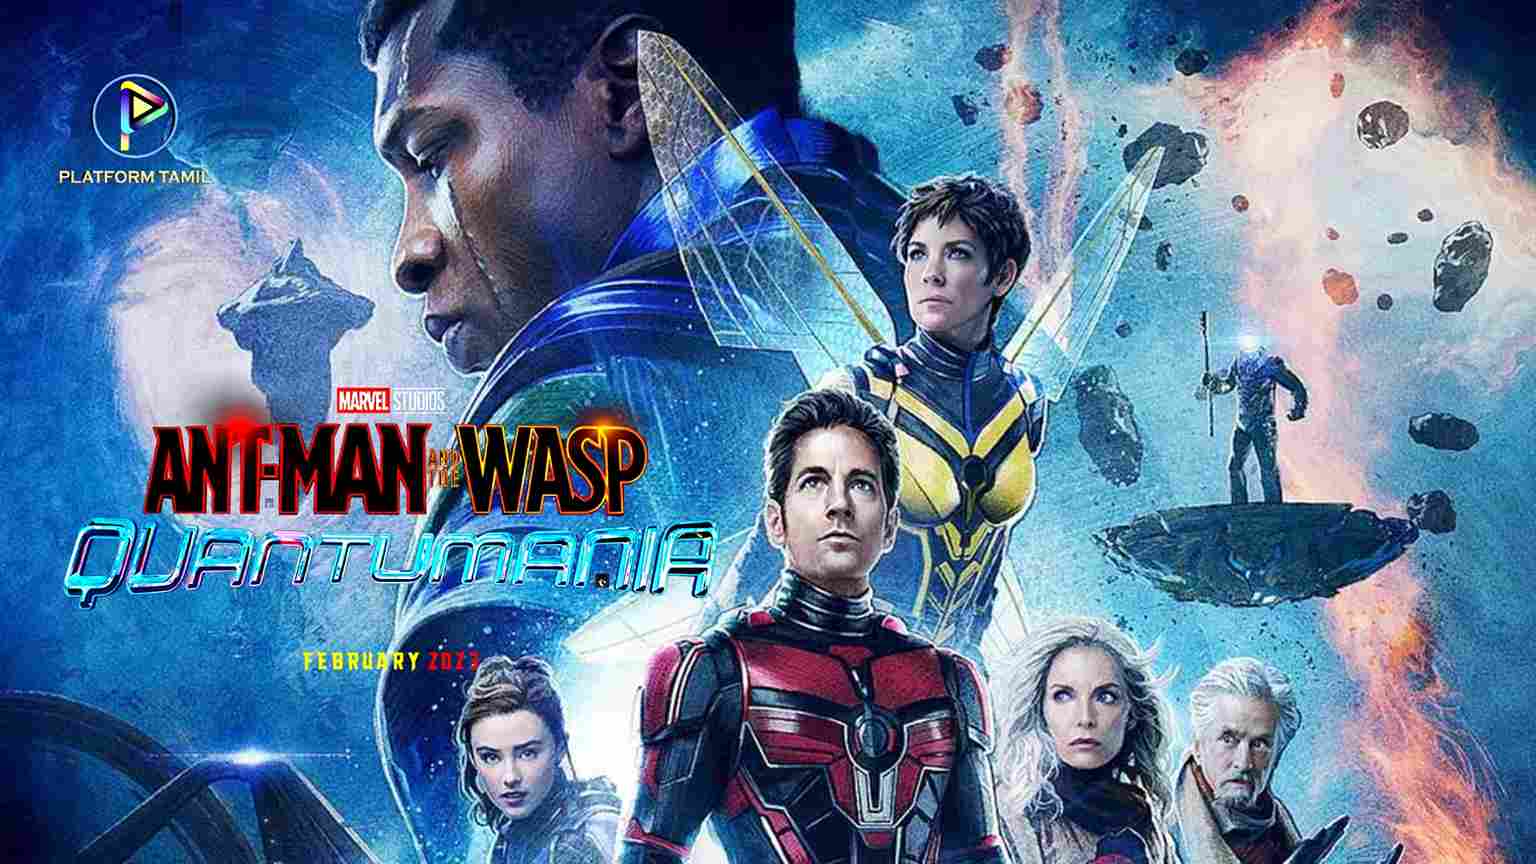 Ant-Man and The Wasp: Quantumania (2023) - Platform Tamil